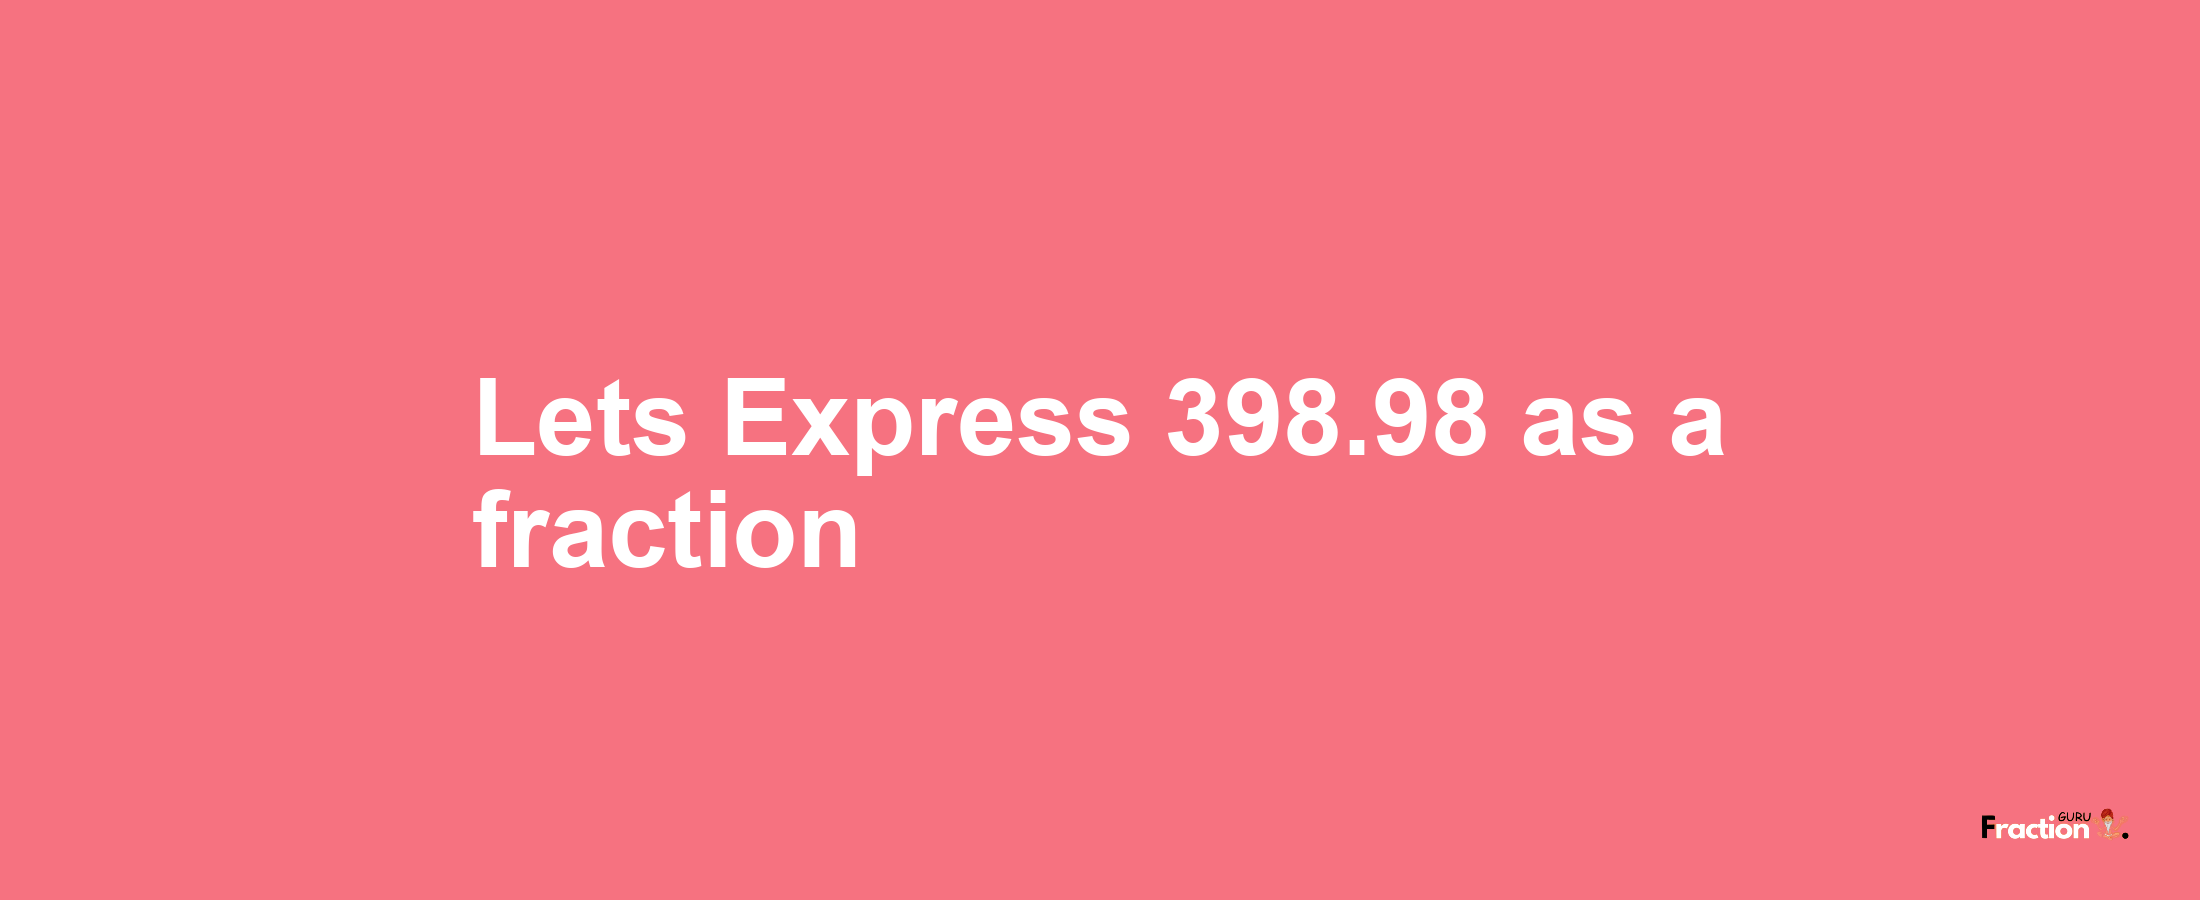 Lets Express 398.98 as afraction